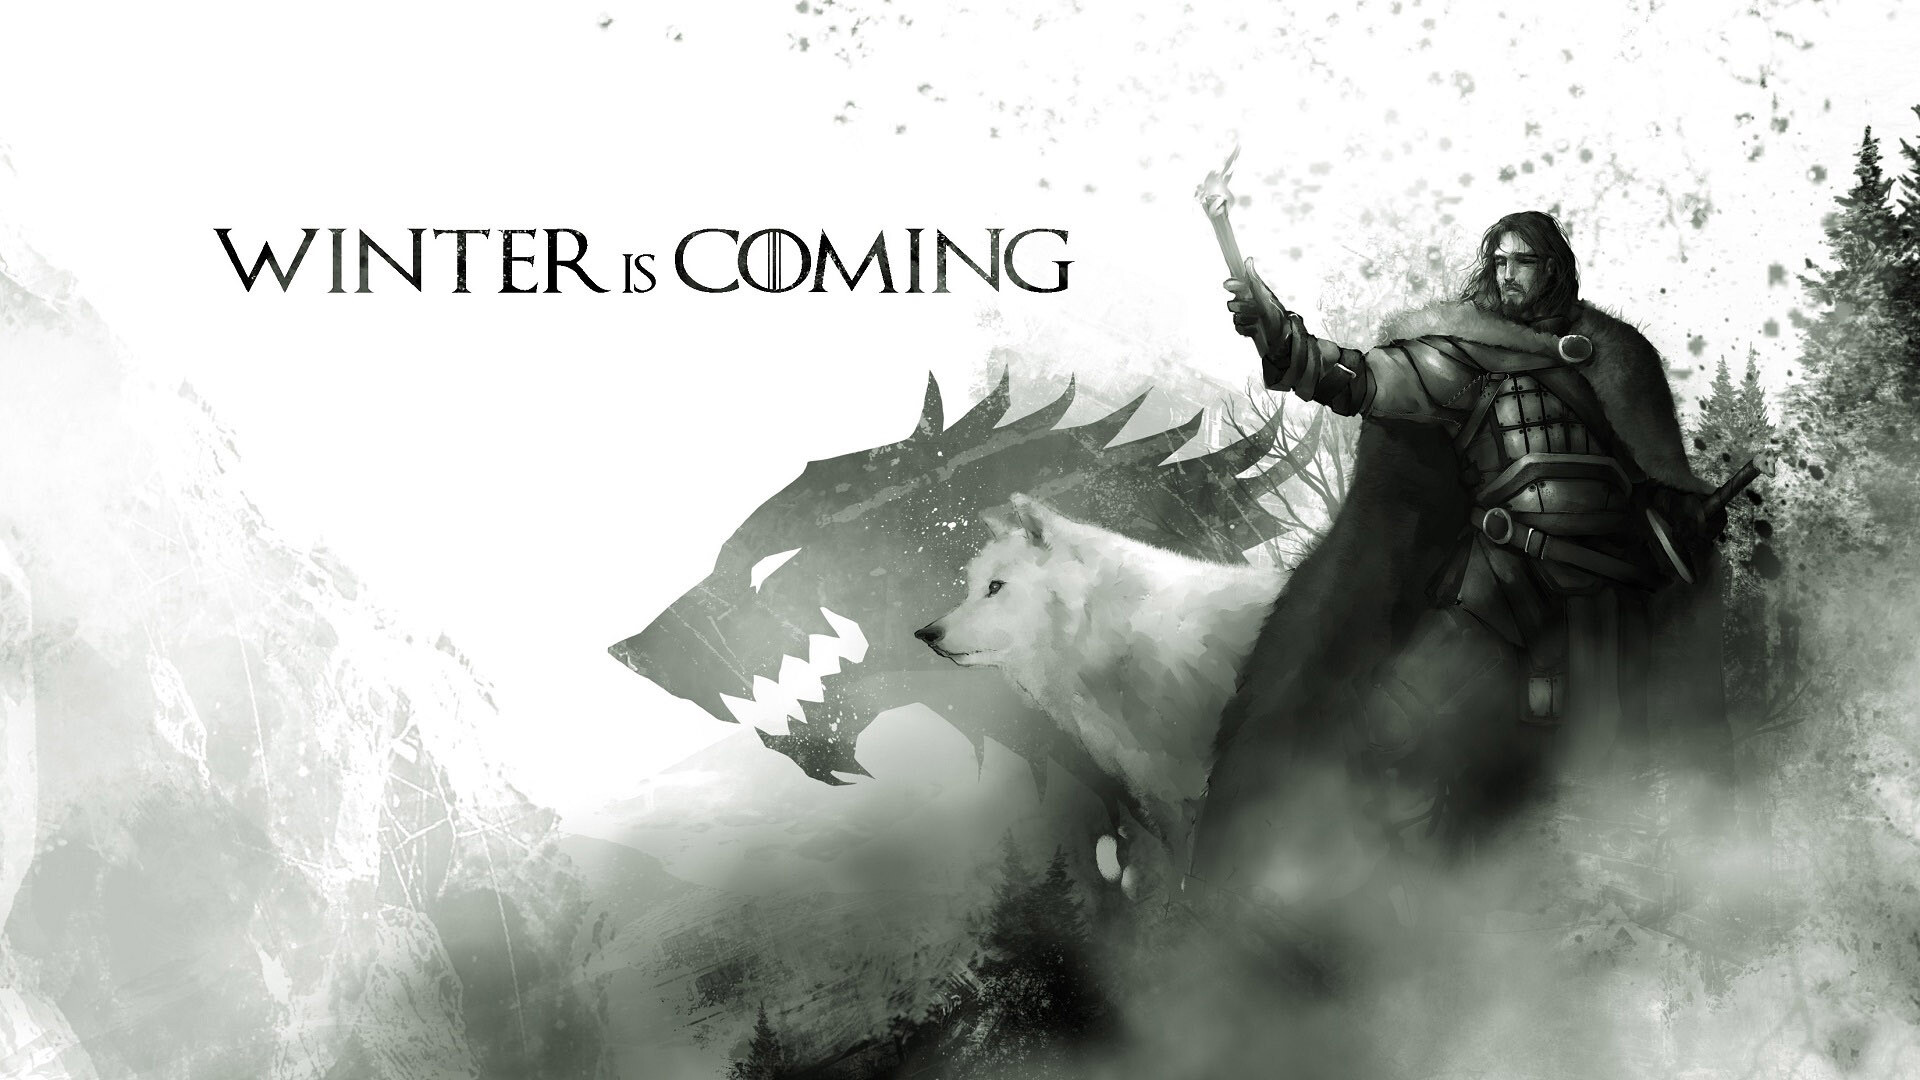 Game of Thrones: Winter is coming, World of Westeros, HBO series. 1920x1080 Full HD Wallpaper.